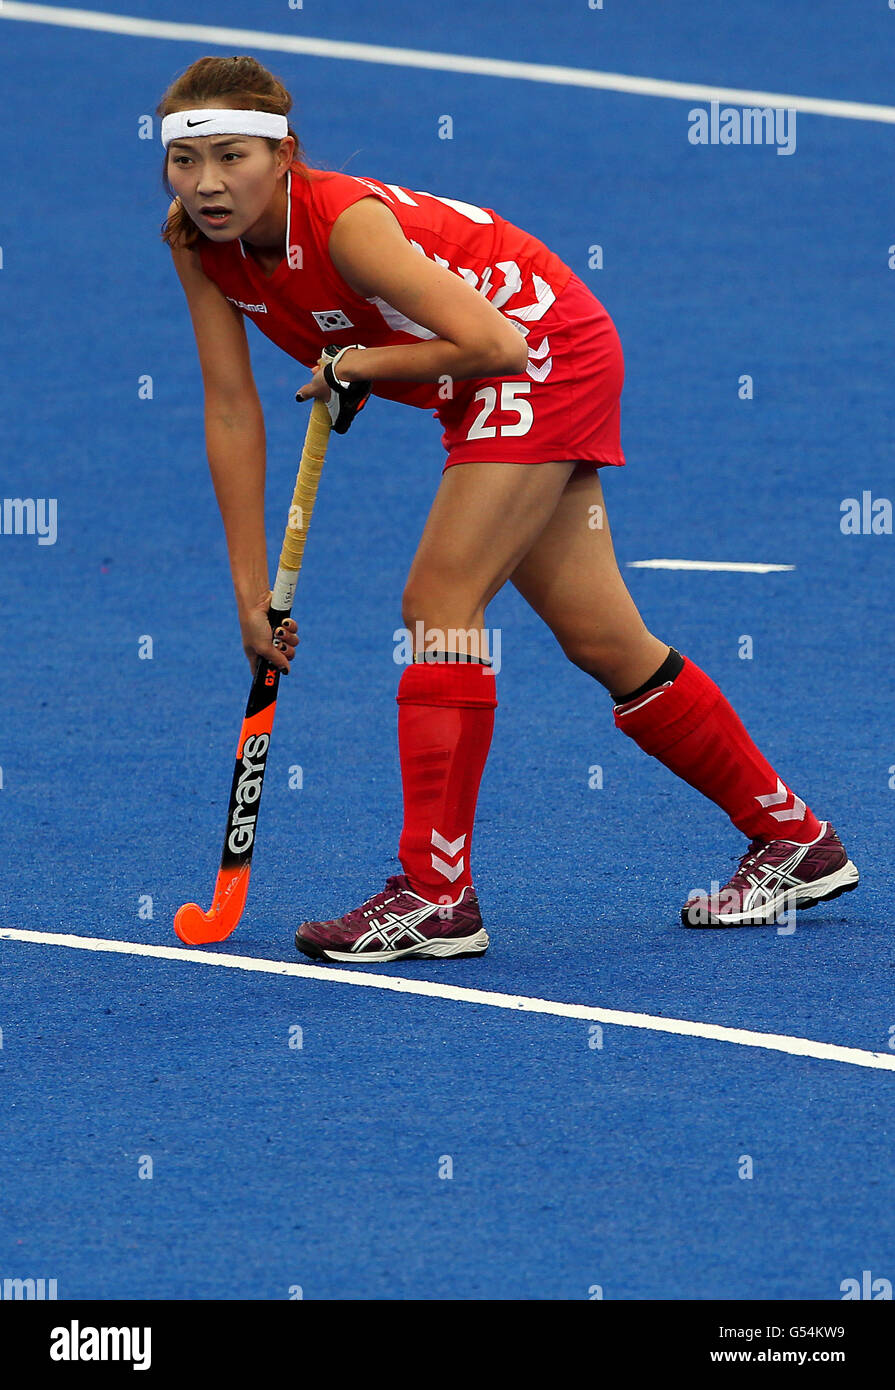 Korea's Hyelyoung Han in action against Argentina during the Visa International Invitational Hockey Tournament at the Riverbank Arena, London. Stock Photo